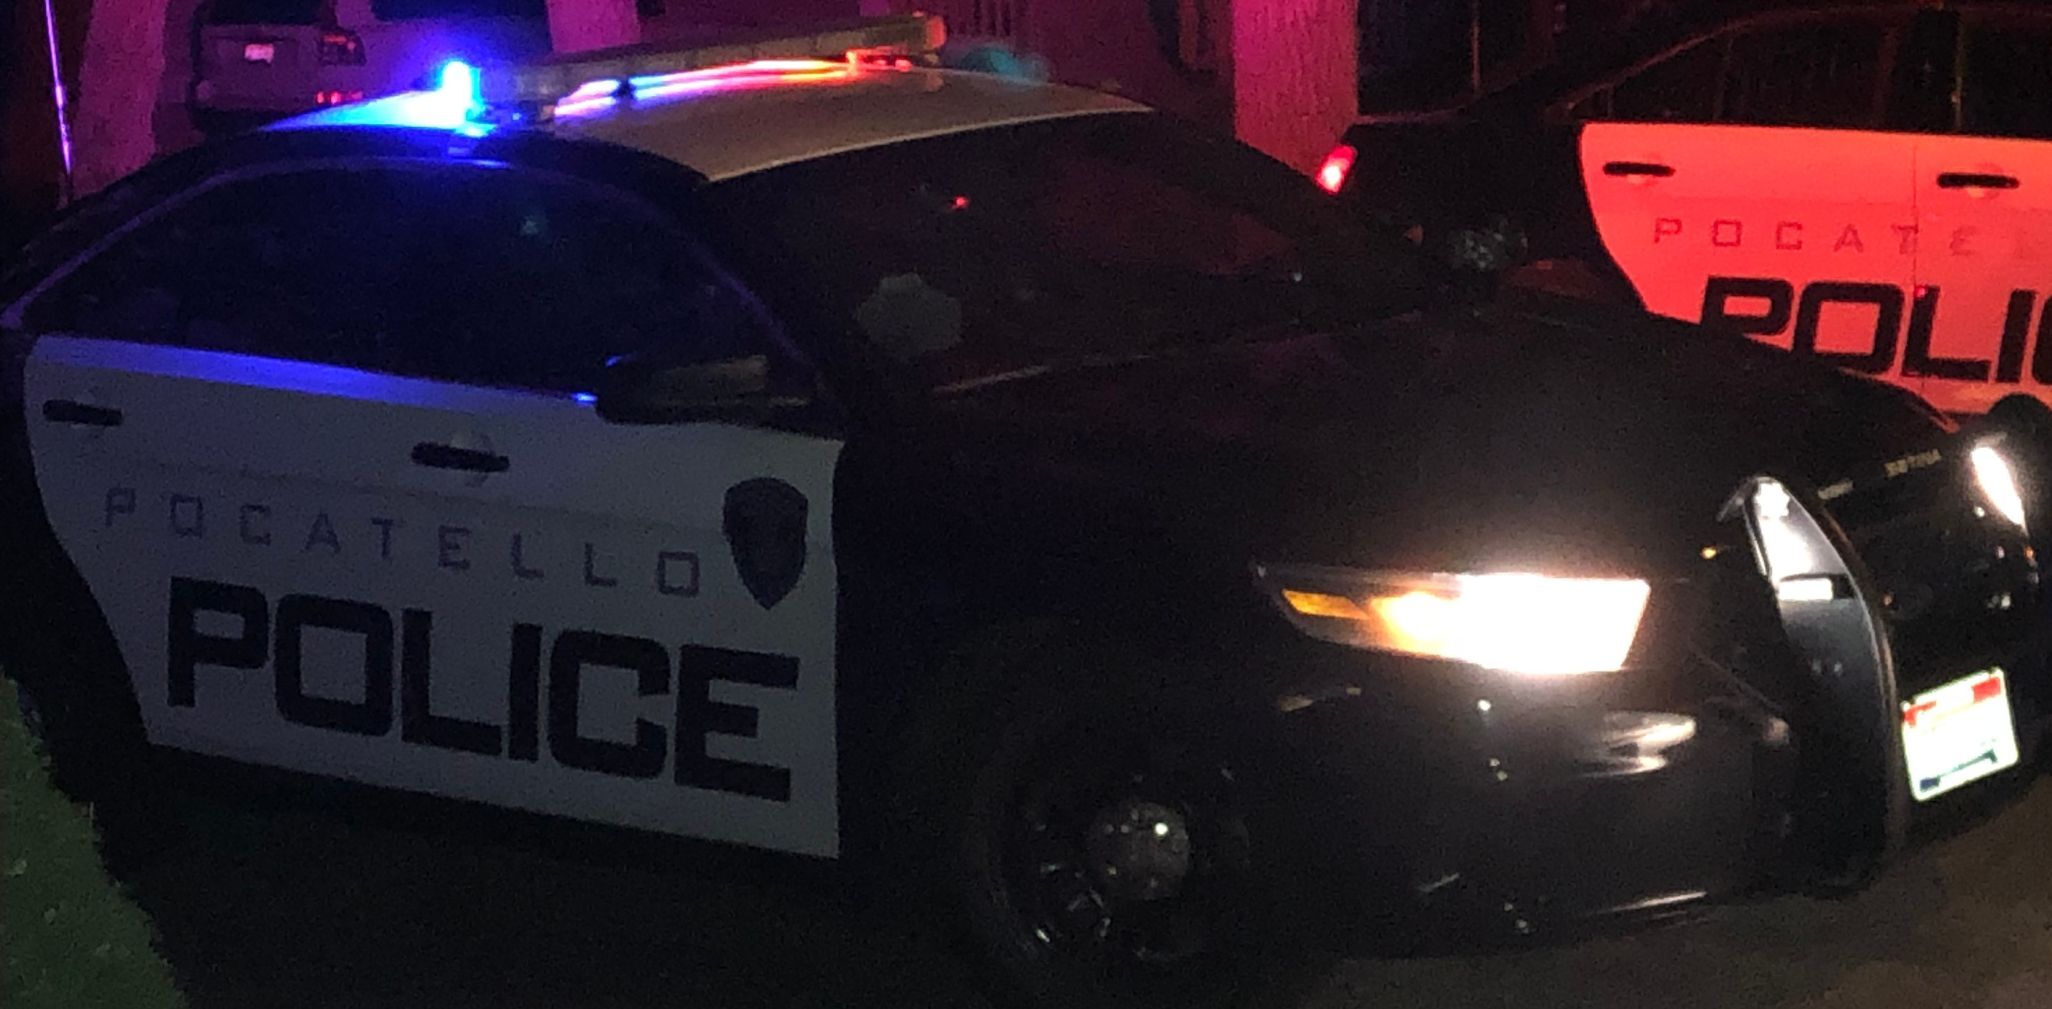 Police Boy airlifted to hospital after accidentally shooting himself at downtown Pocatello home Freeaccess idahostatejournal image